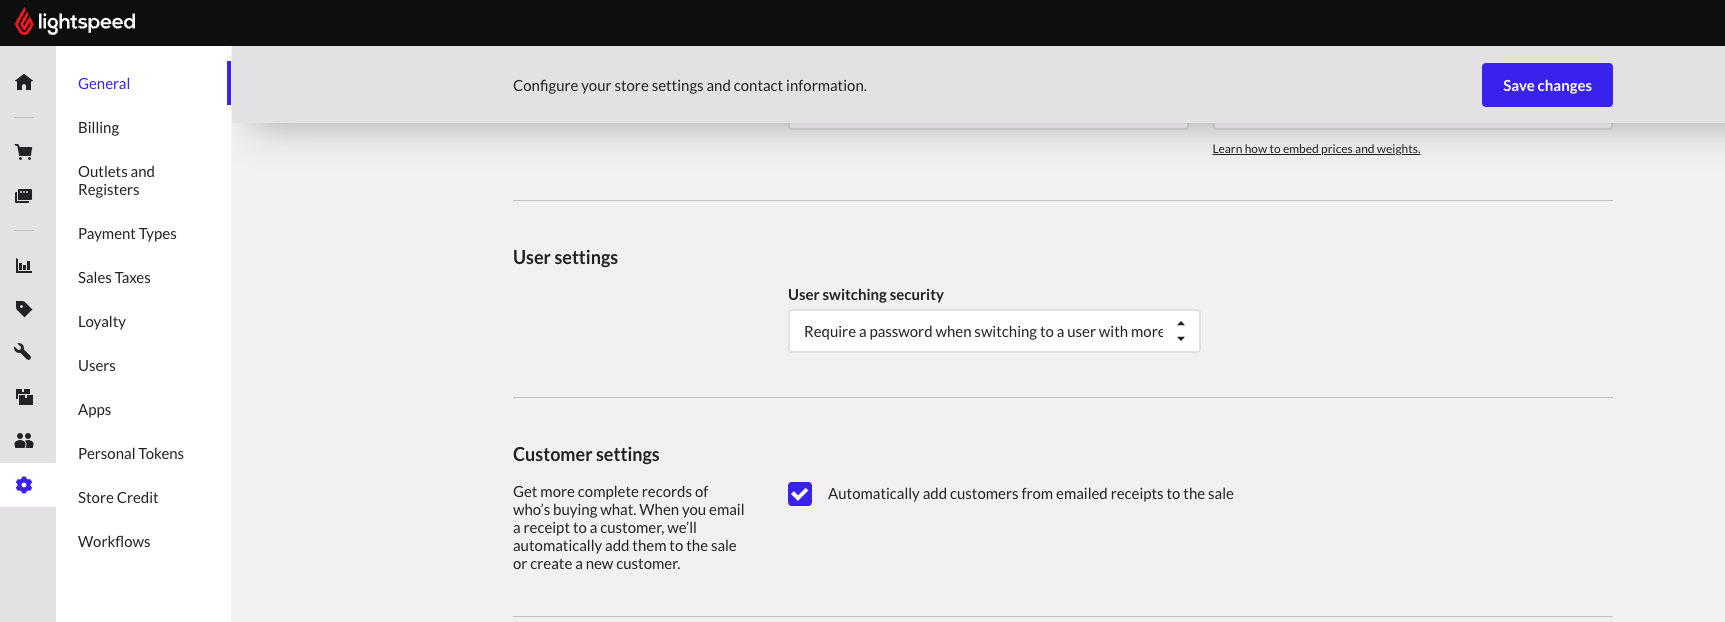 General settings page showing user switching and customer settings fields.